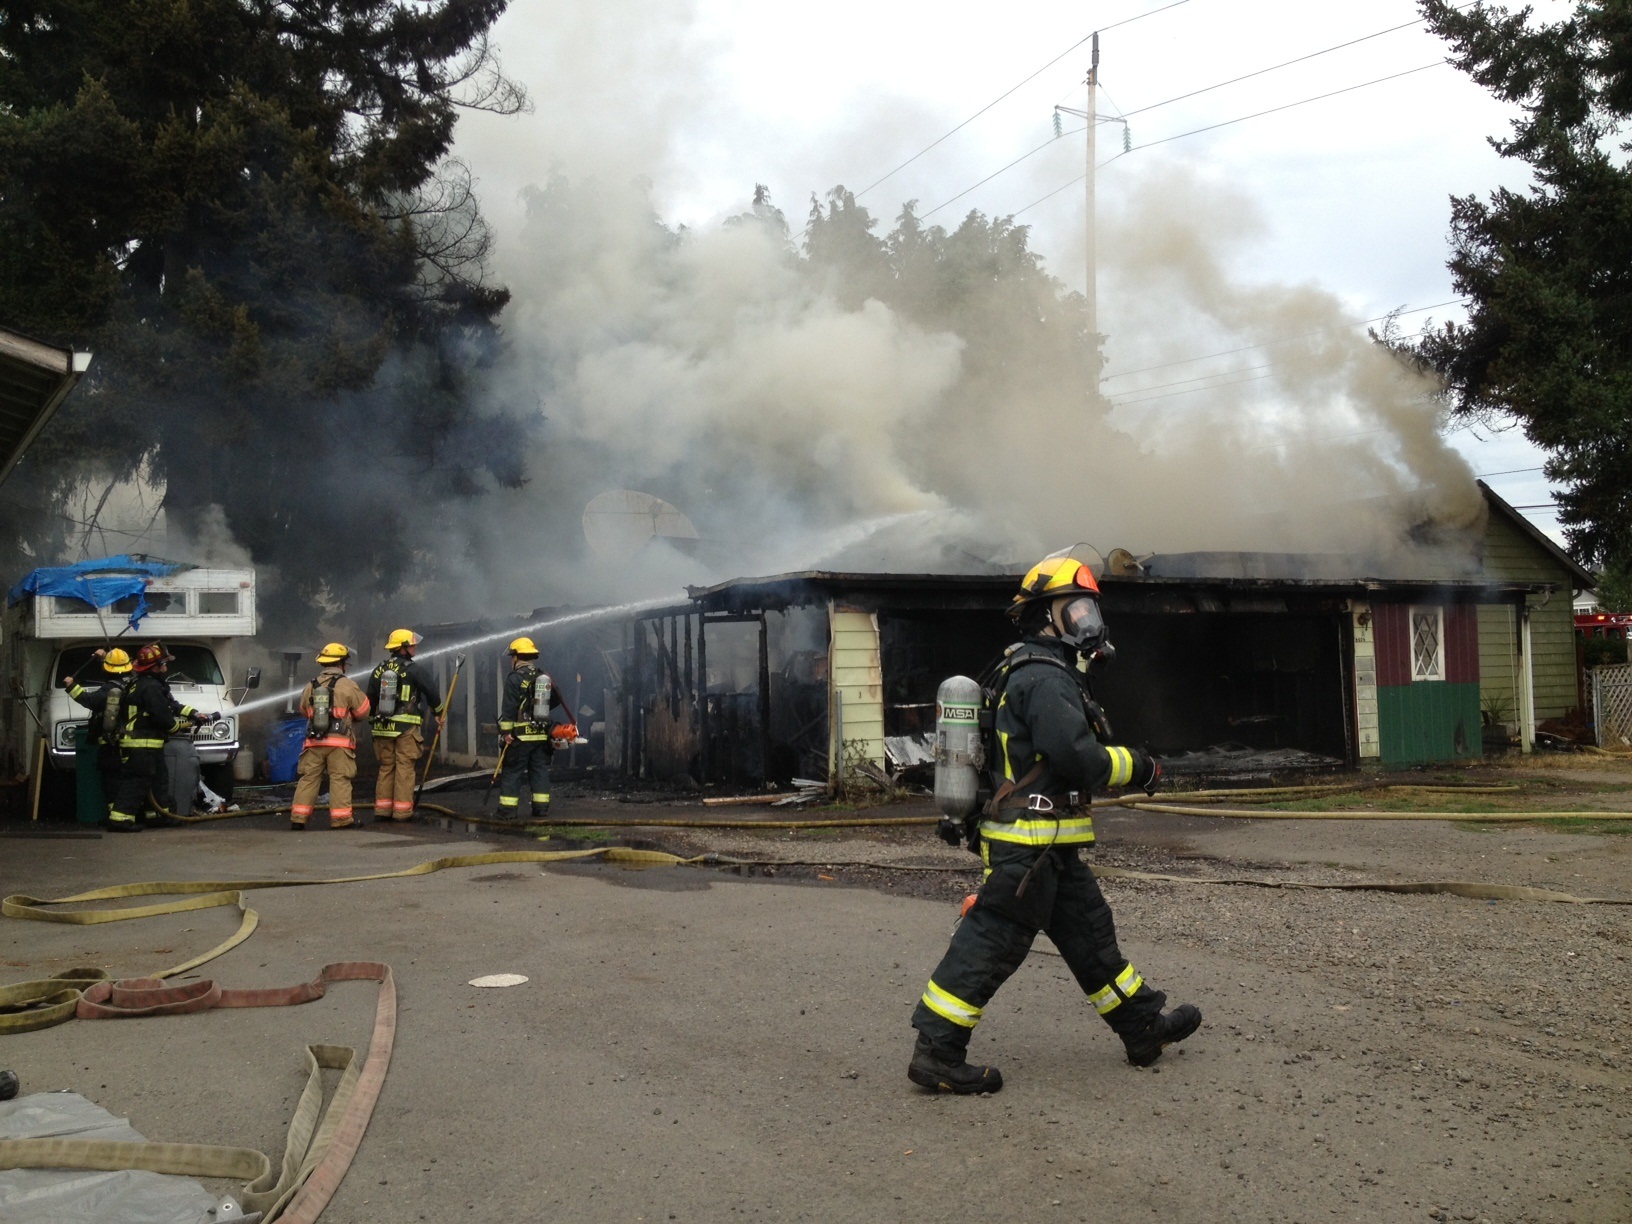 Firefighters battle a house fire in Vancouver's North Image neighborhood.